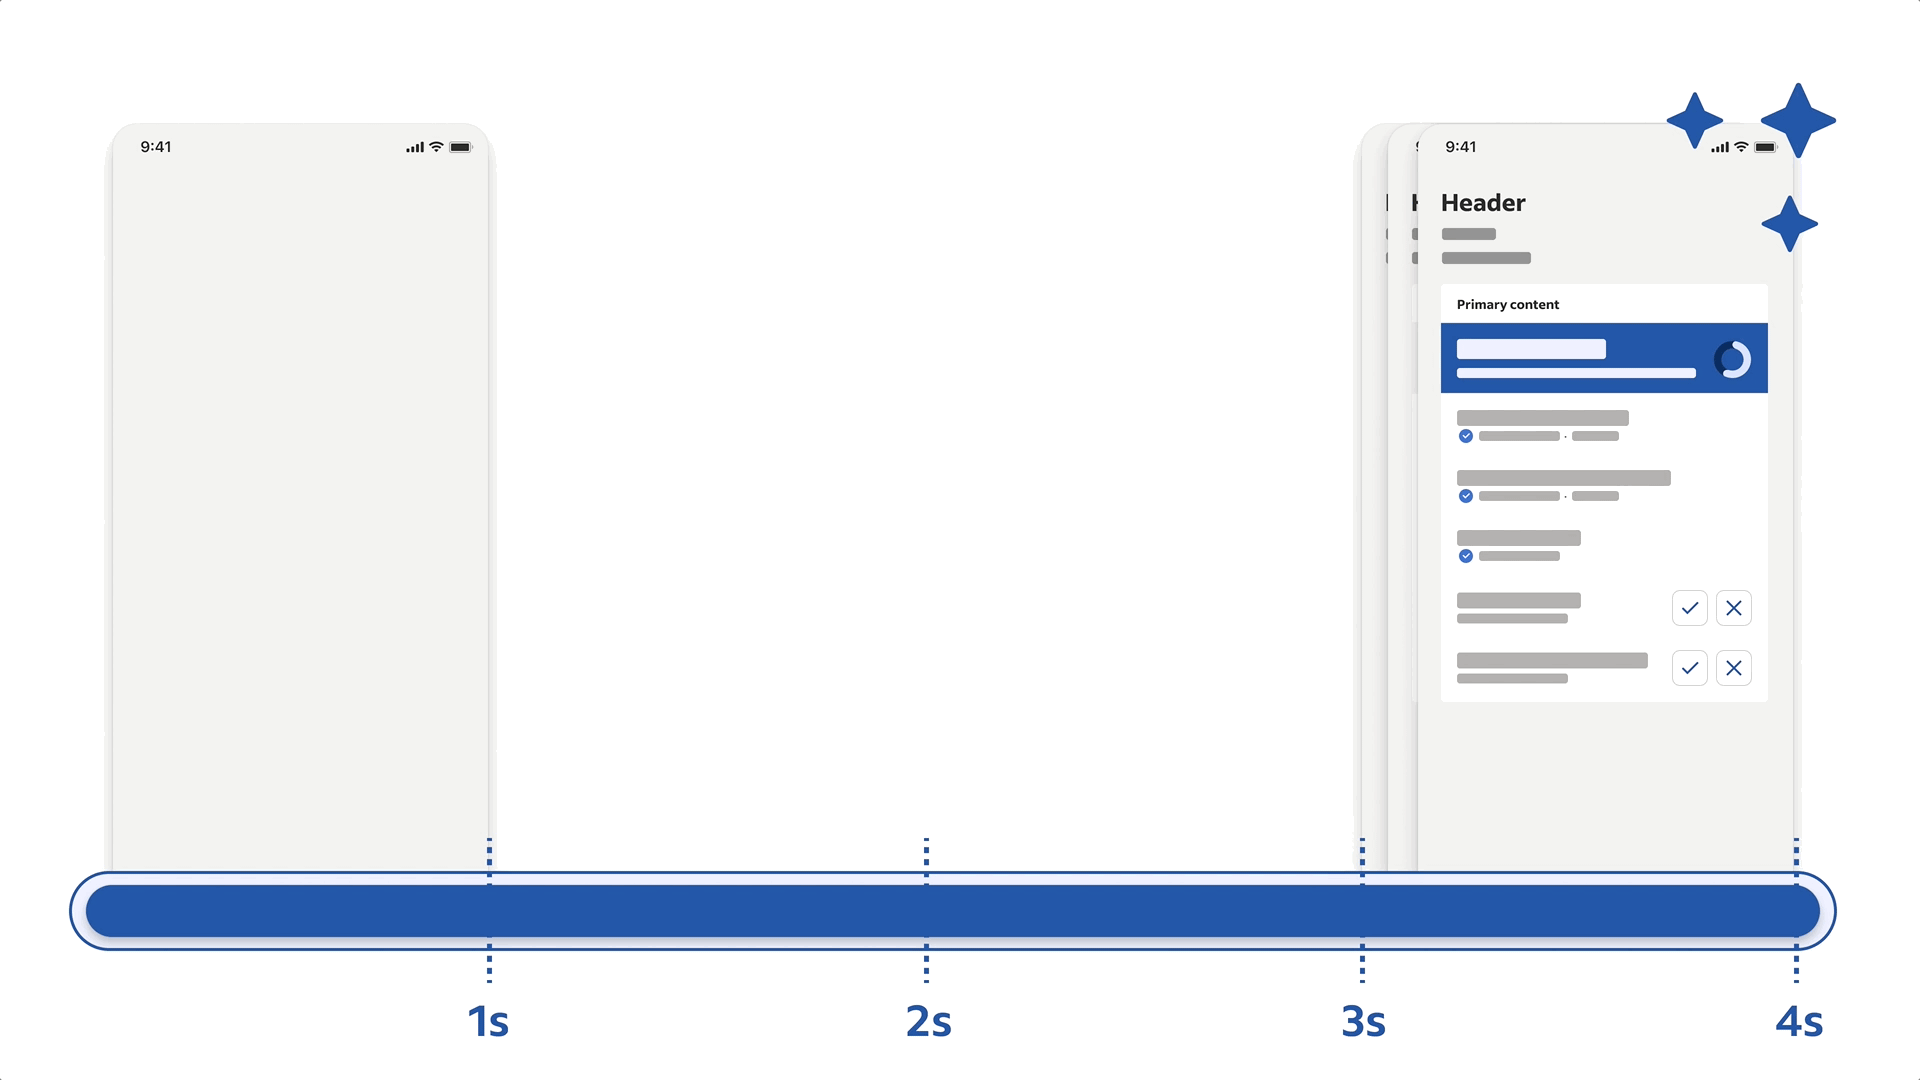 Animated timeline showing a page loading four seconds, with the last three changes happening quickly near the end of the four seconds